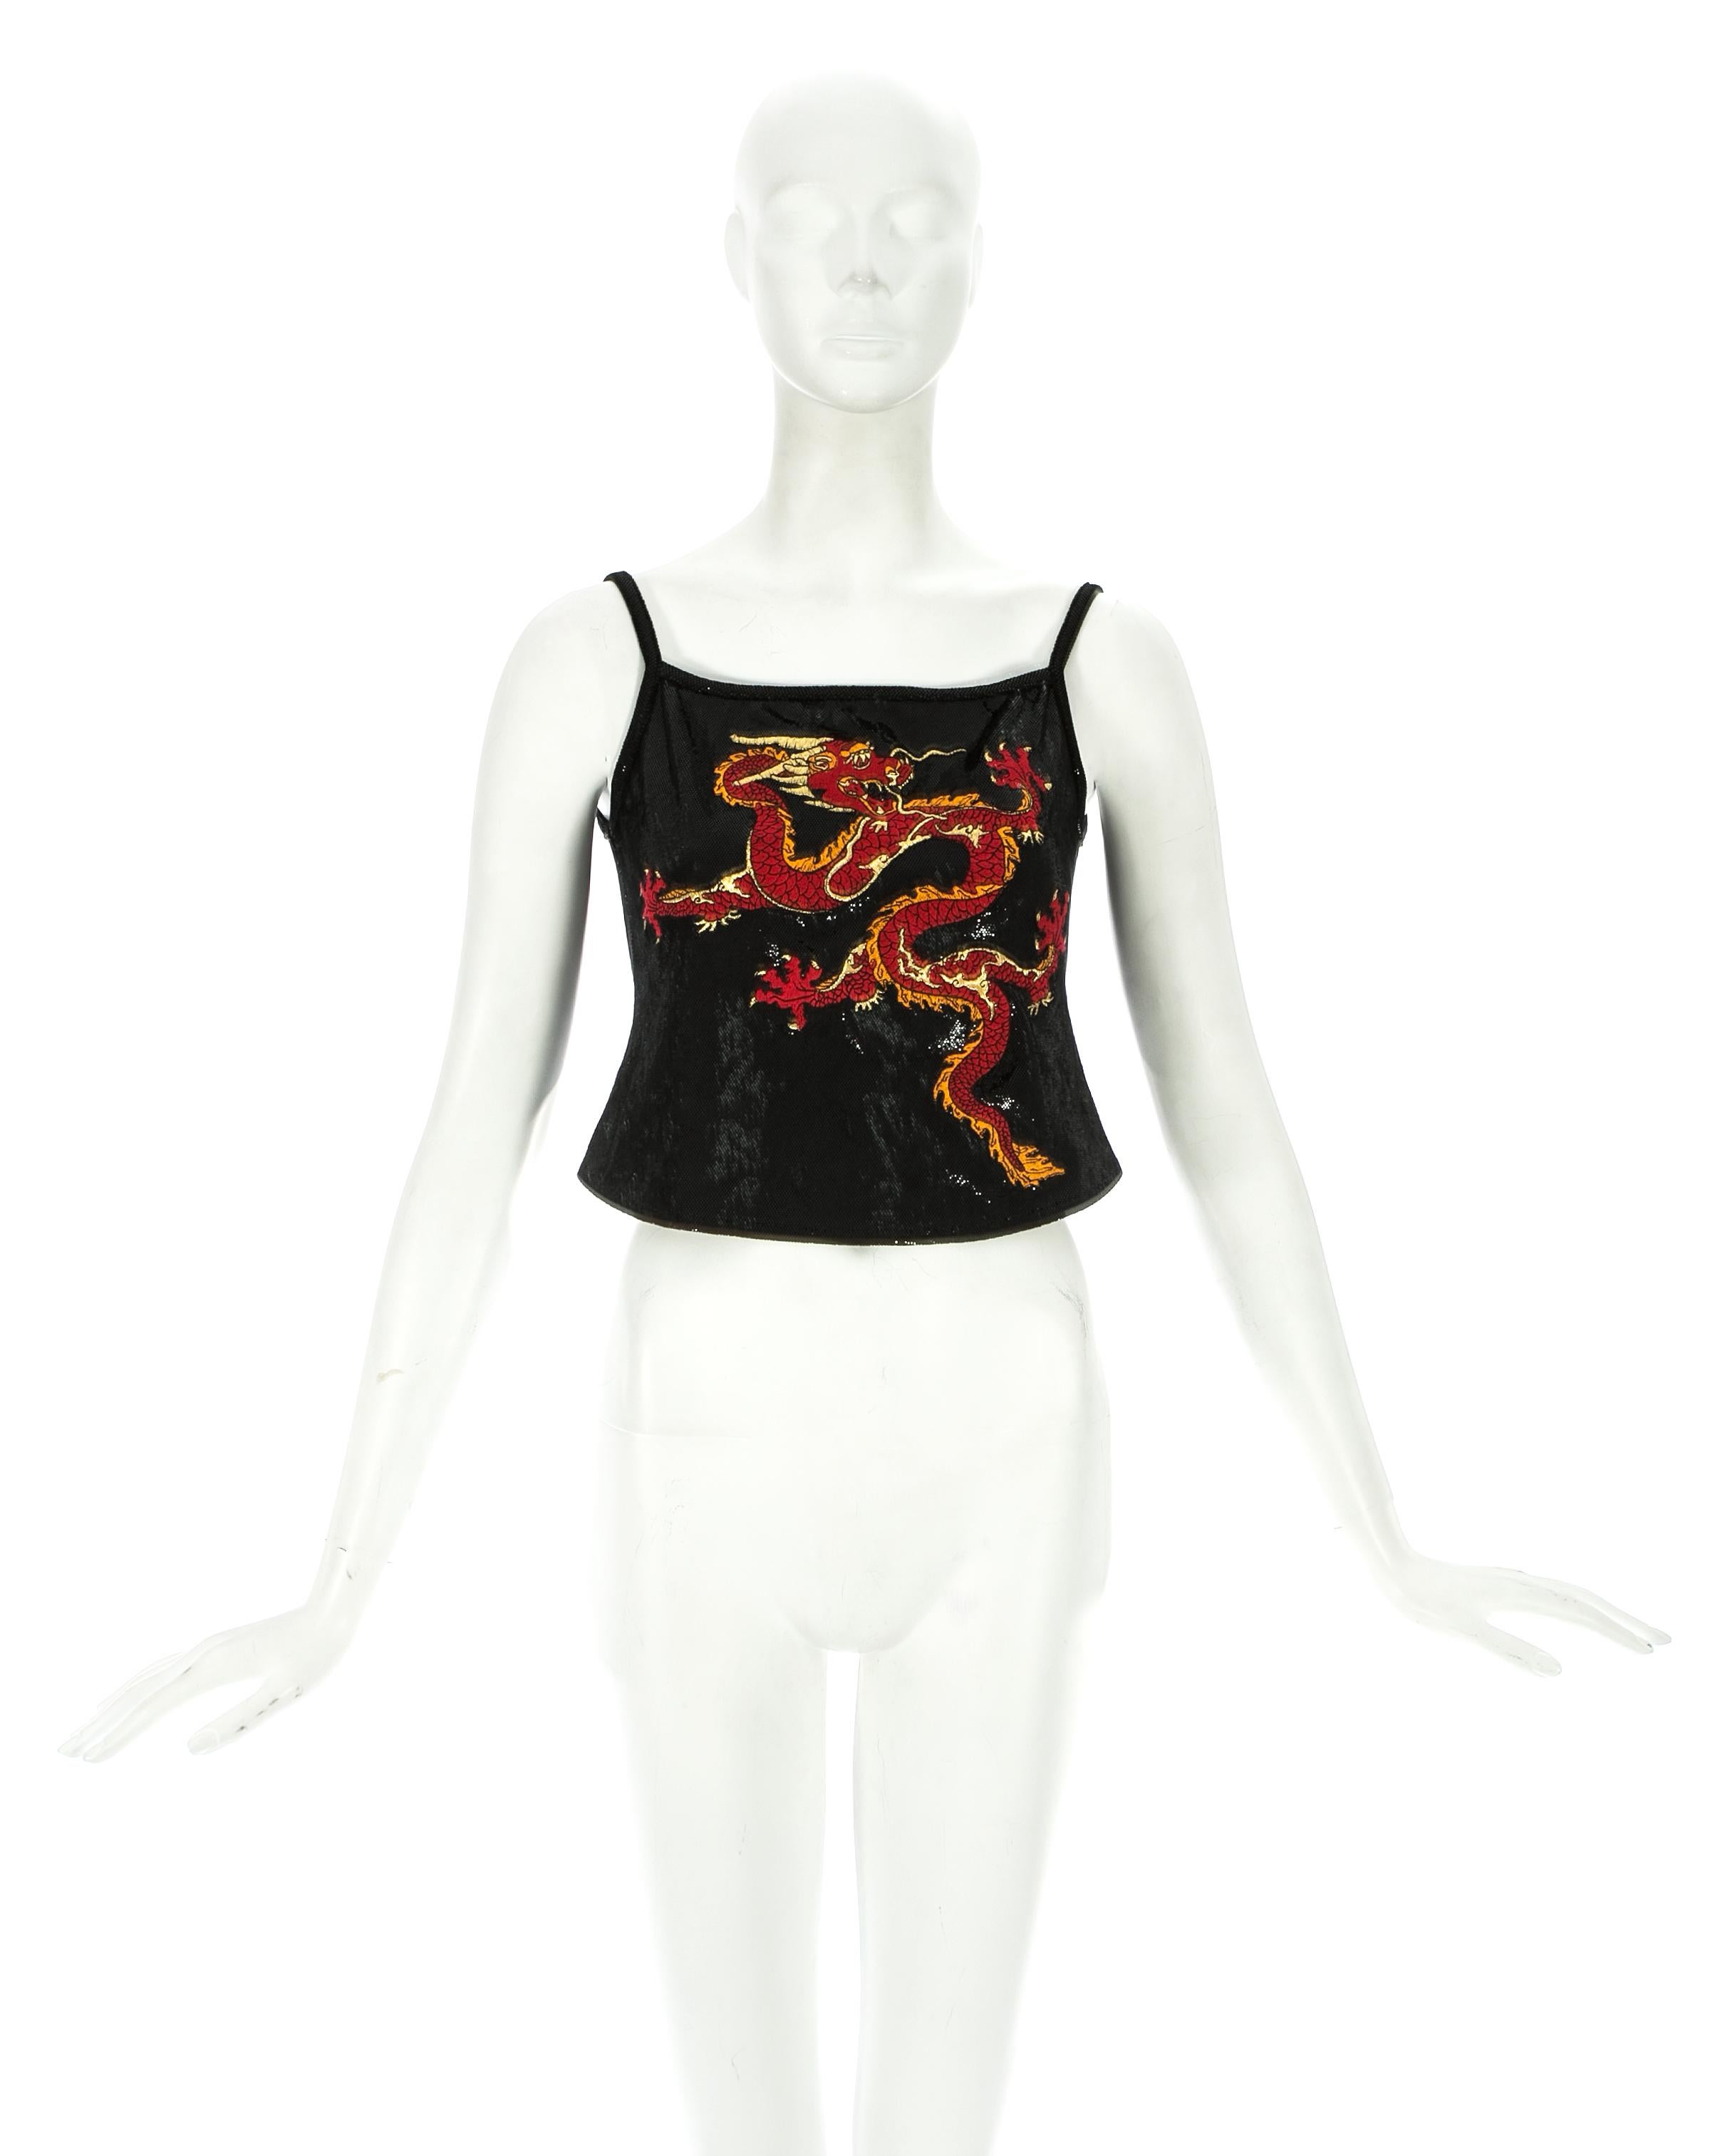 Paco Rabanne; black acetate cropped vest in a reptile skin effect with an embroidered dragon on the front

Fall-Winter 1997